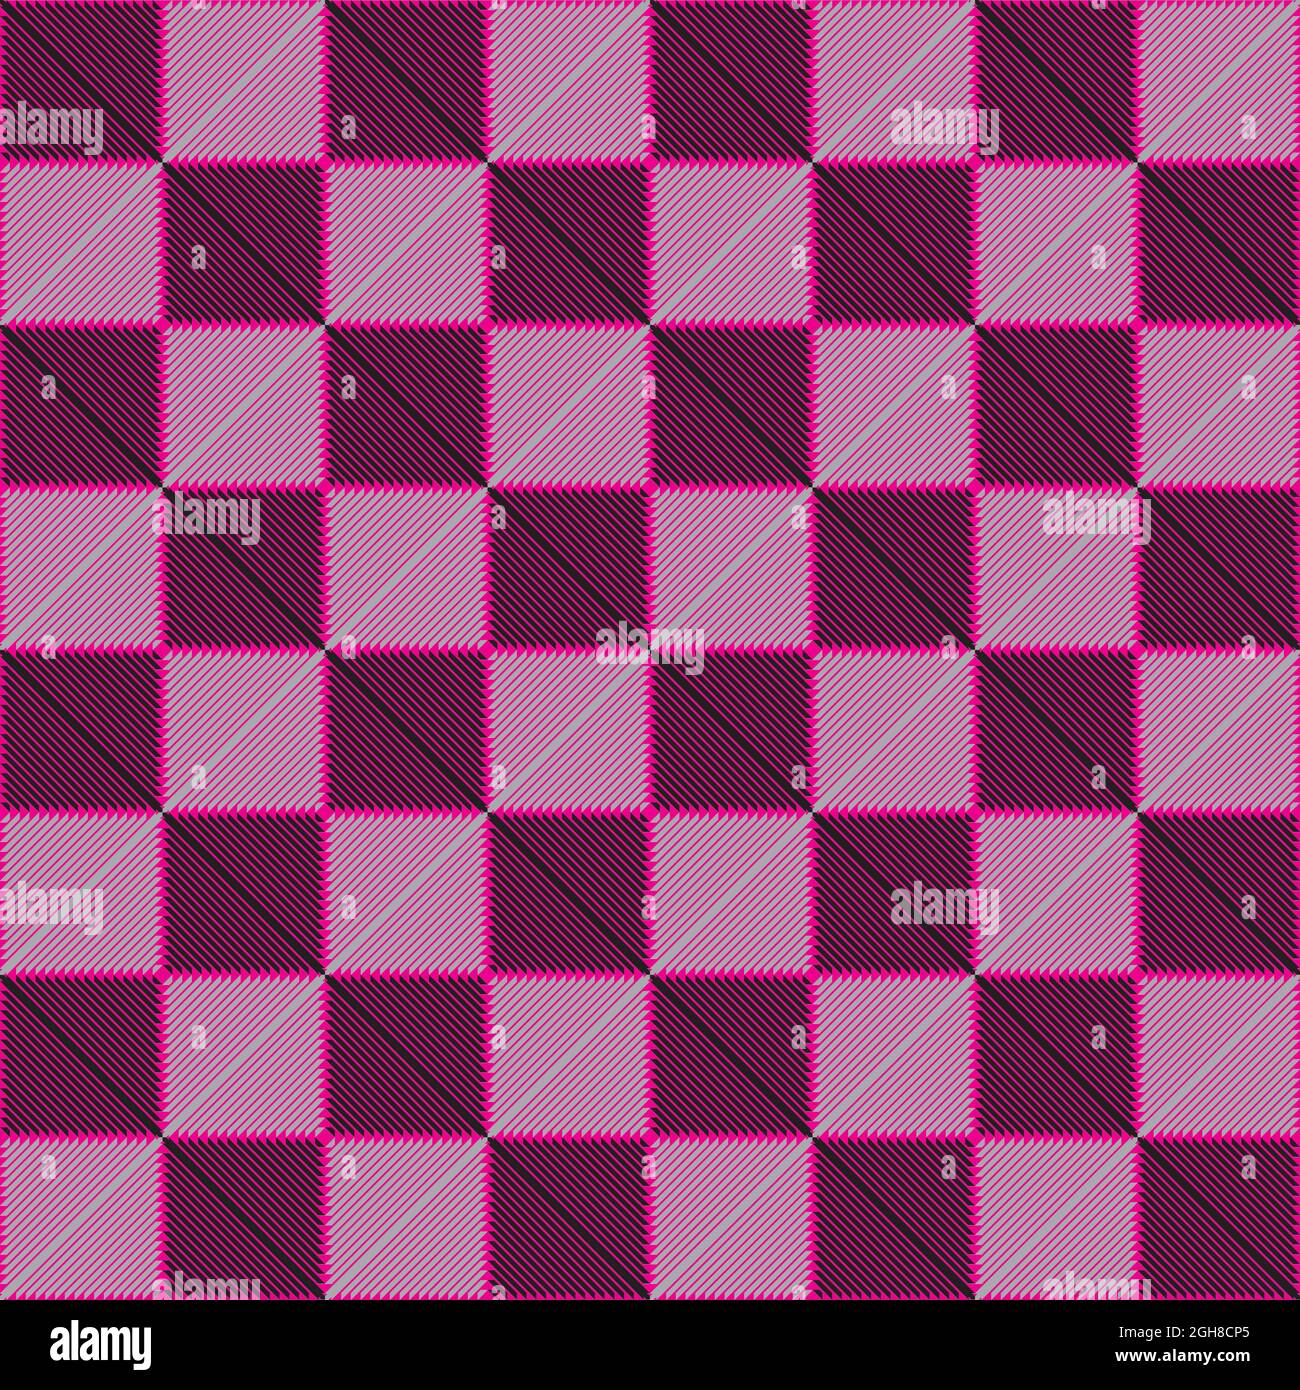 Chess modern look table pink diagonals with black gray squares designer cut Stock Vector